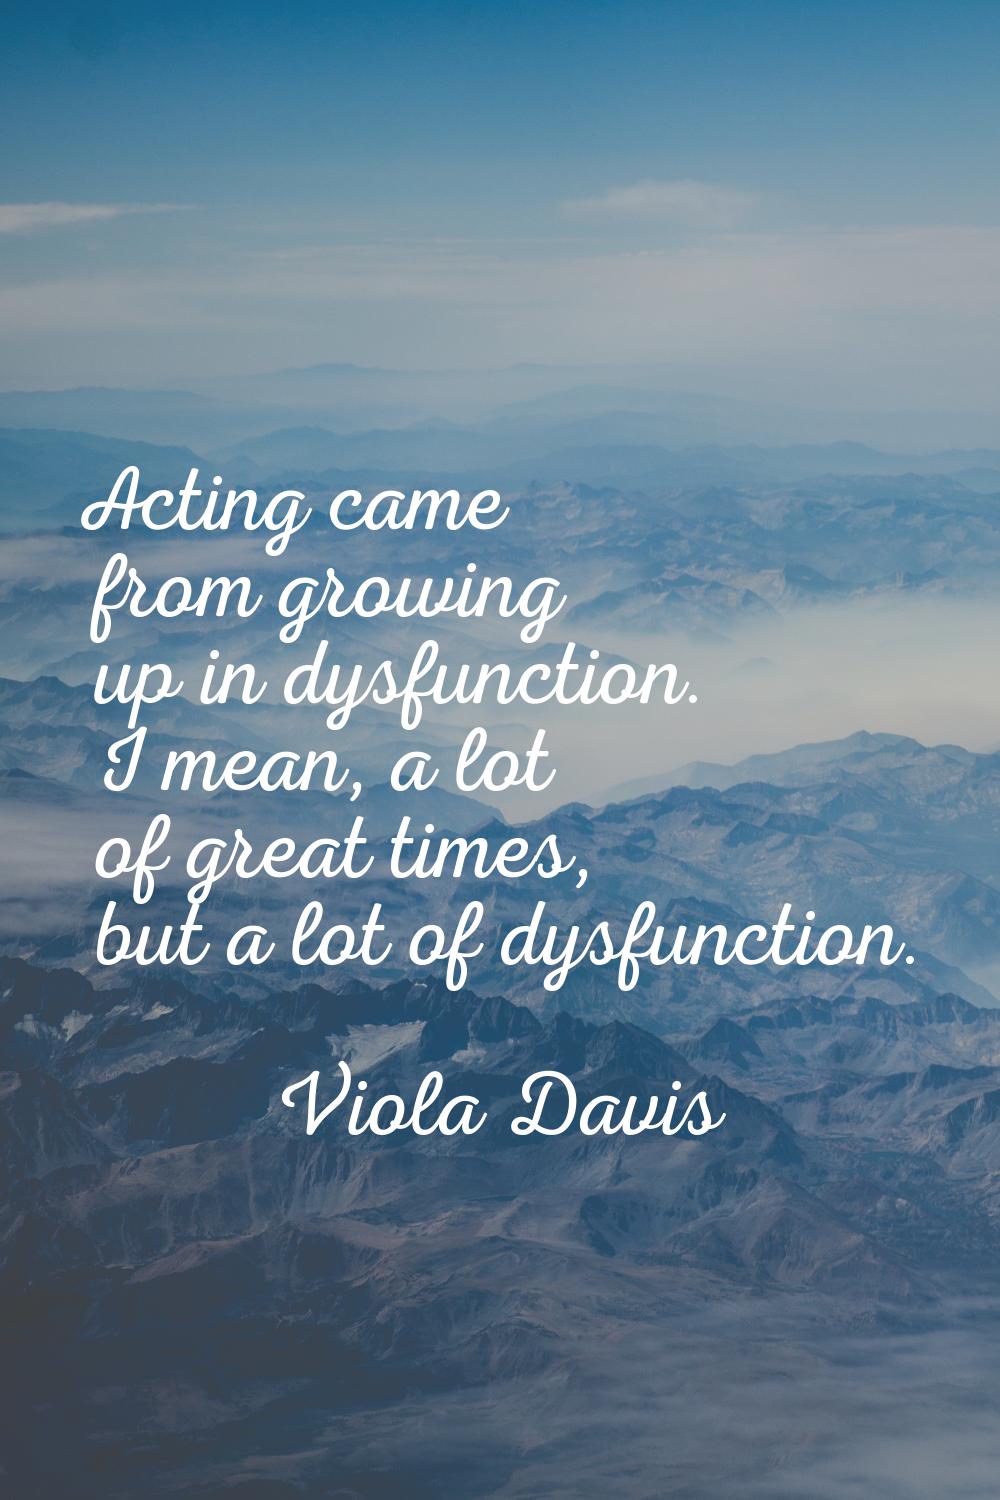 Acting came from growing up in dysfunction. I mean, a lot of great times, but a lot of dysfunction.